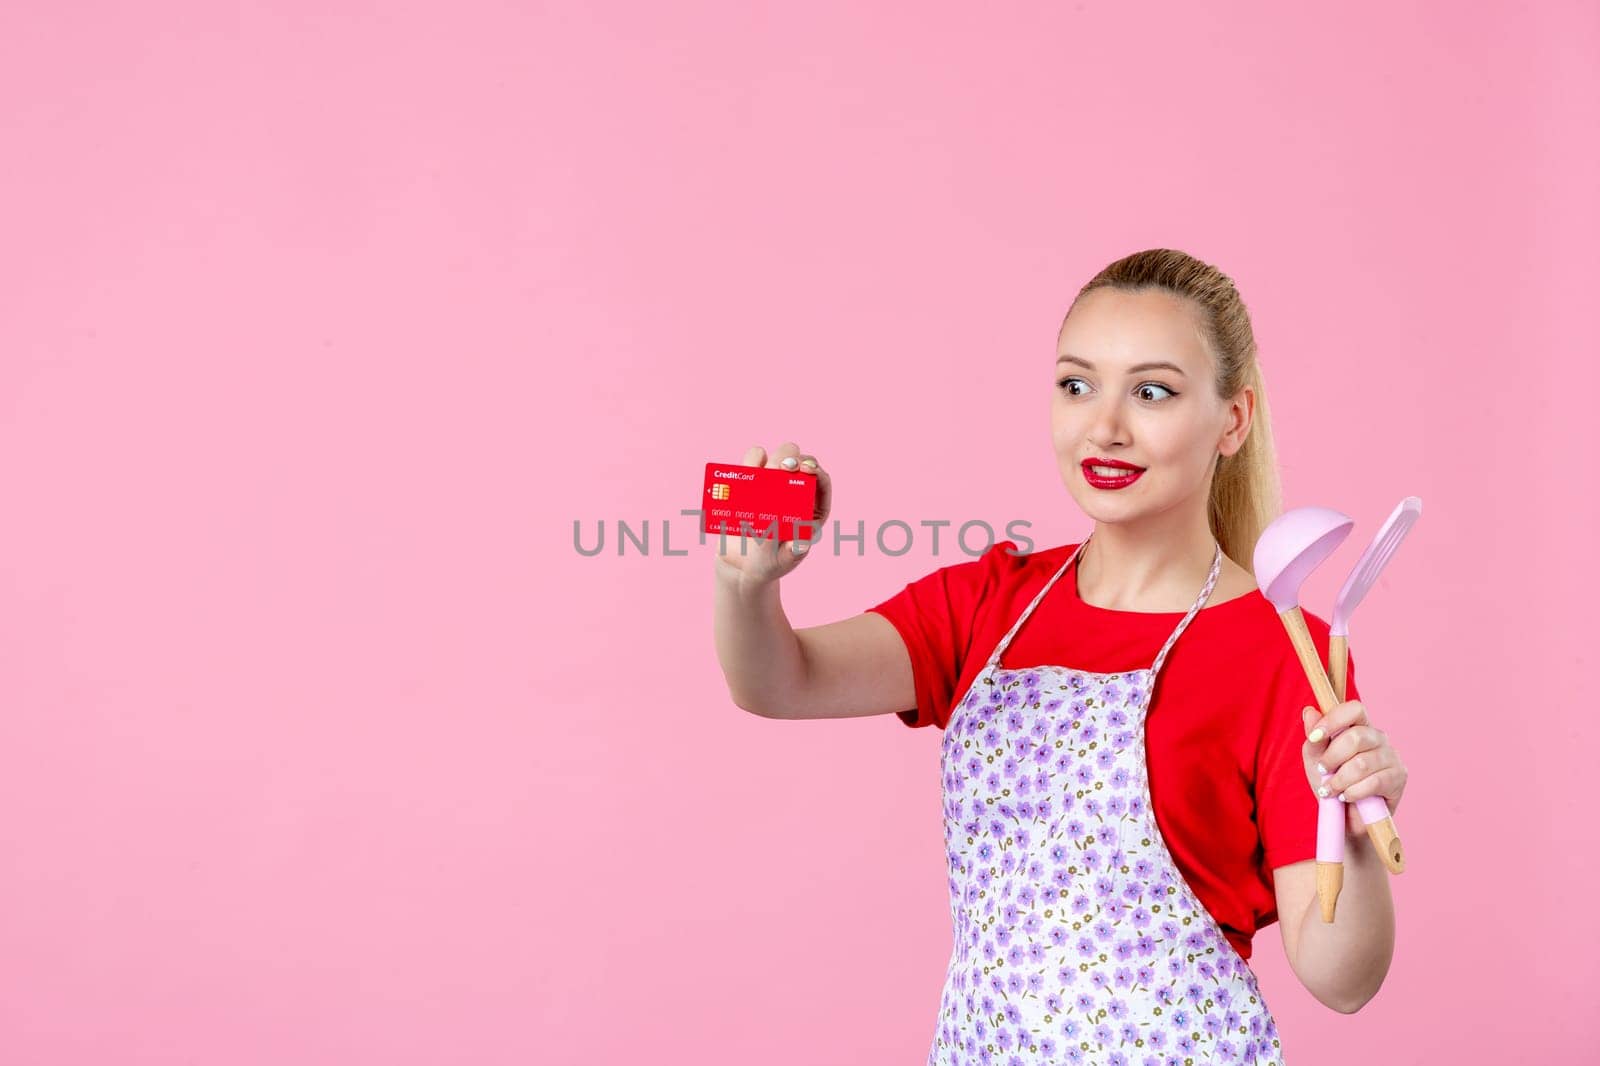 front view young housewife in cape holding spoons and bank card on pink background occupation duty worker horizontal wife profession uniform job cutlery by Kamran